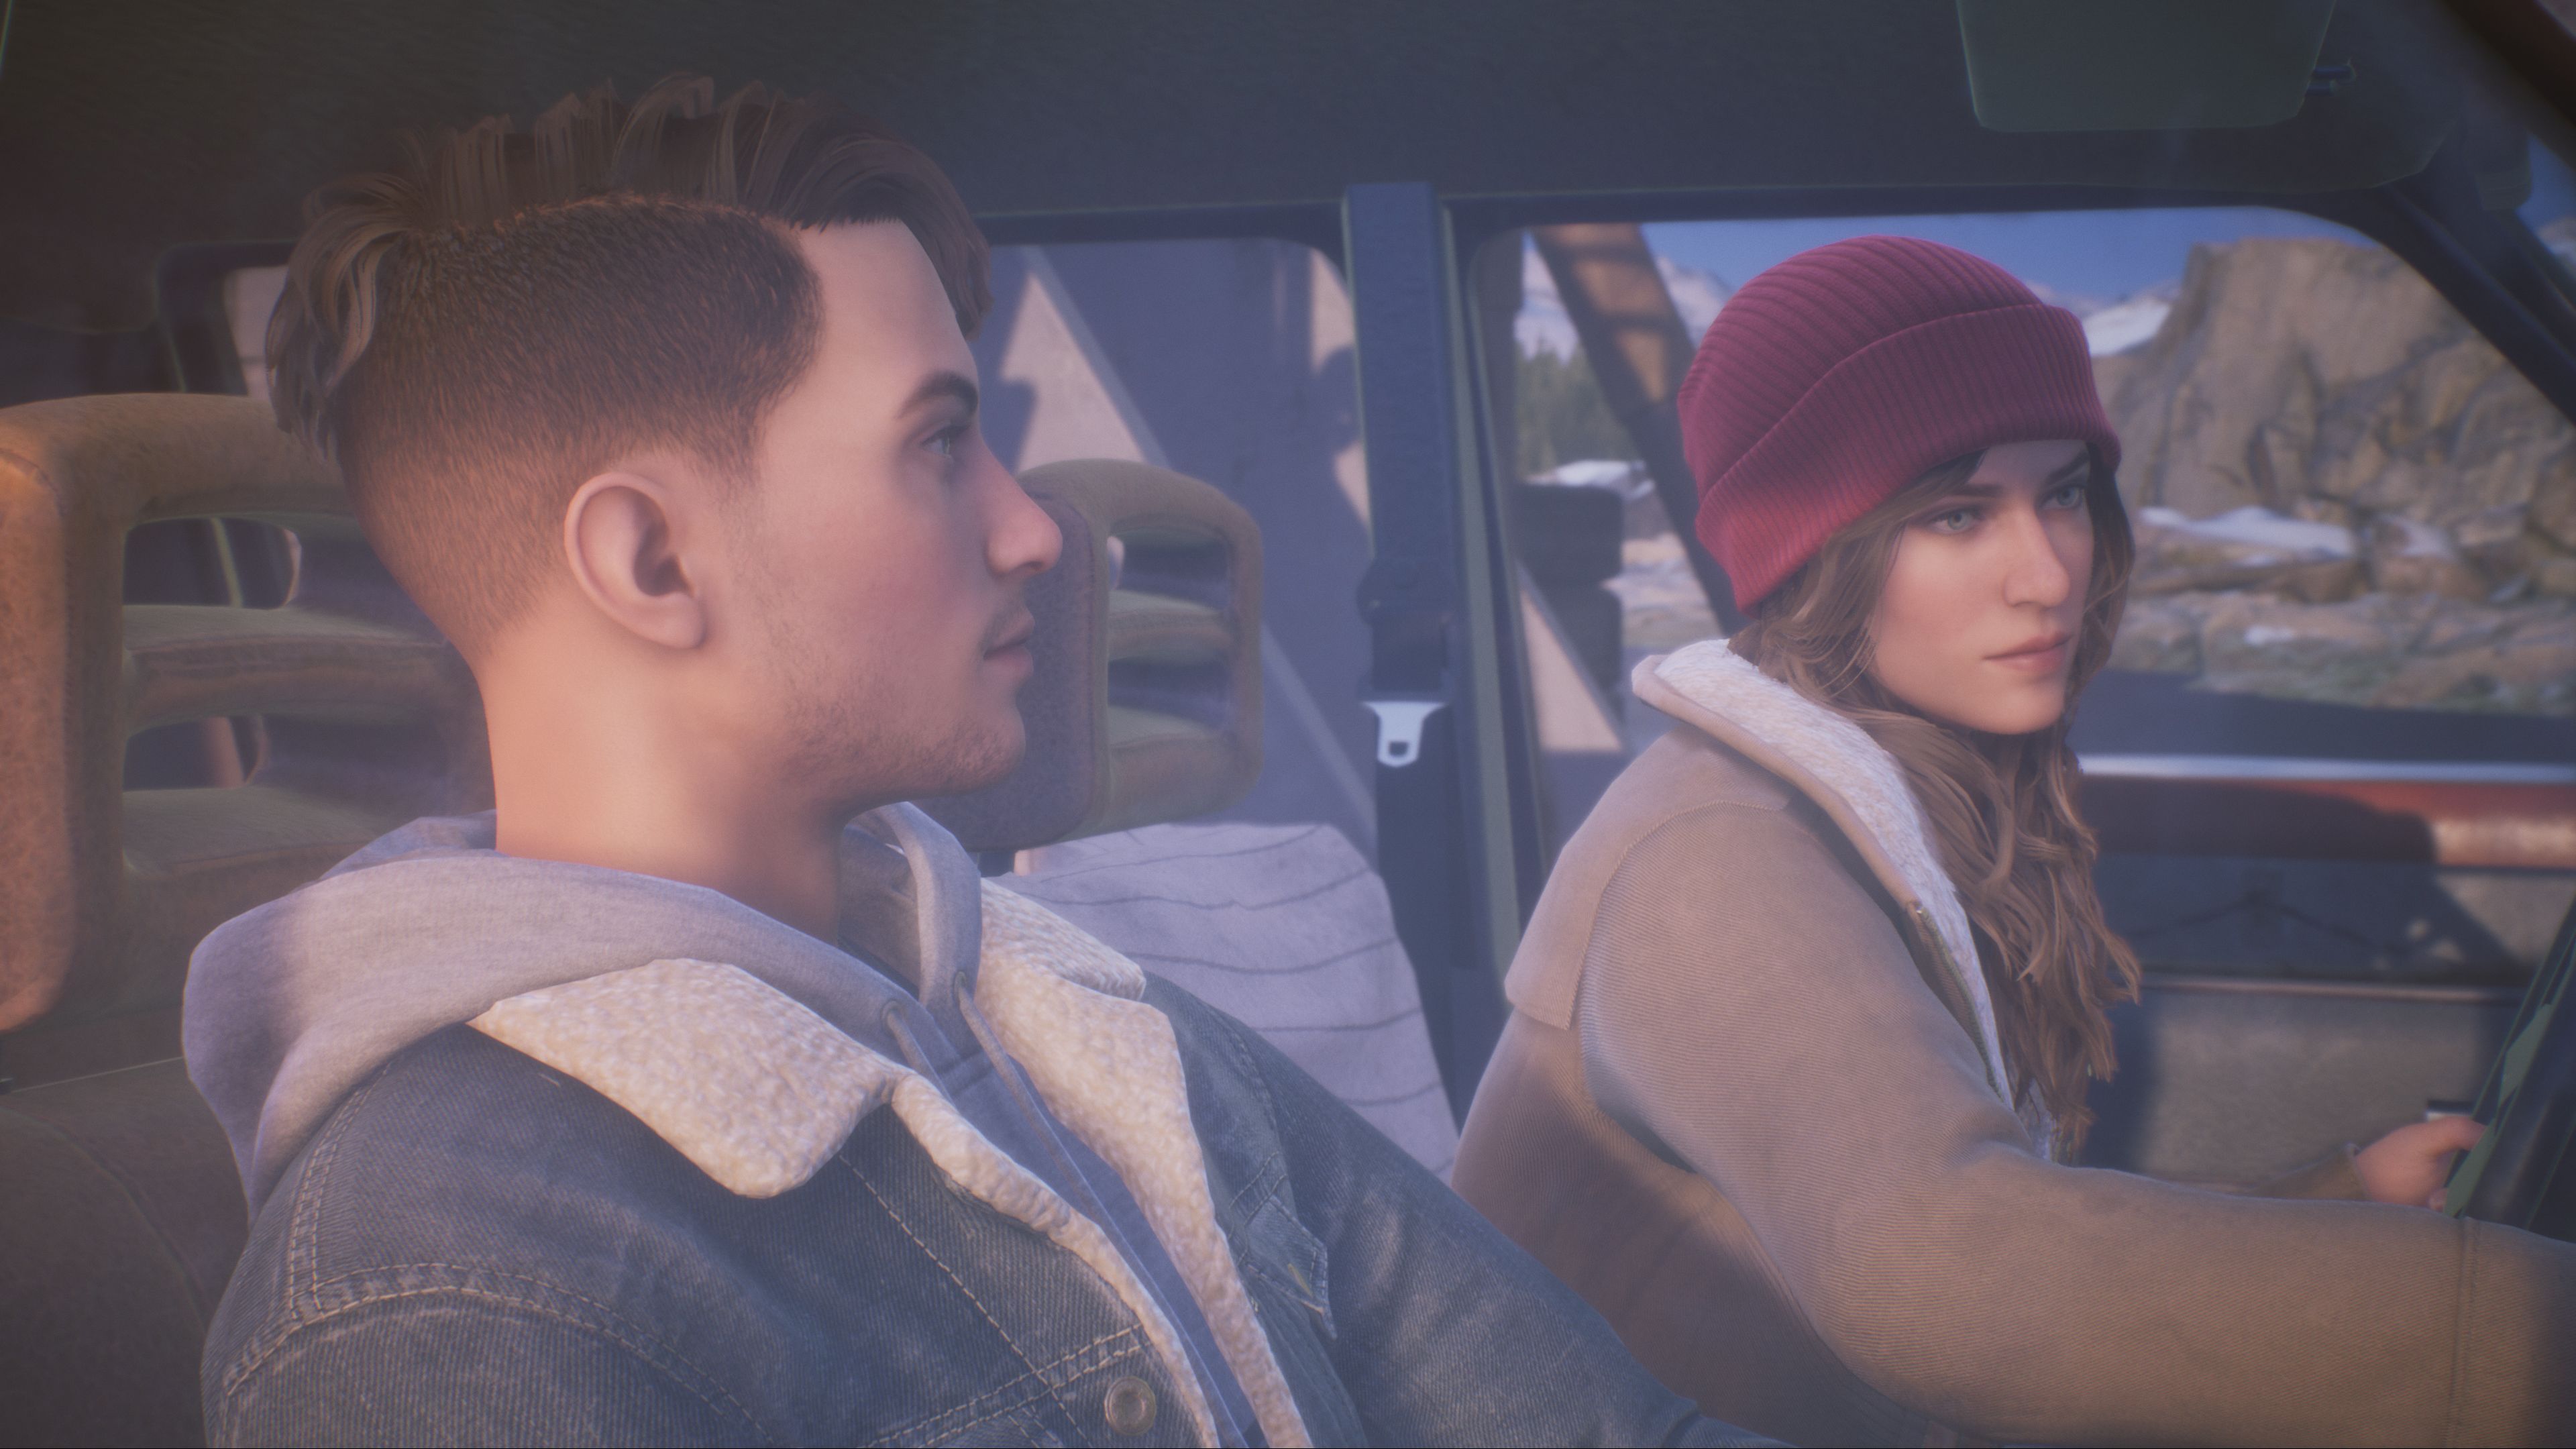 Dontnod's Tell Me Why game will feature a transgender main character